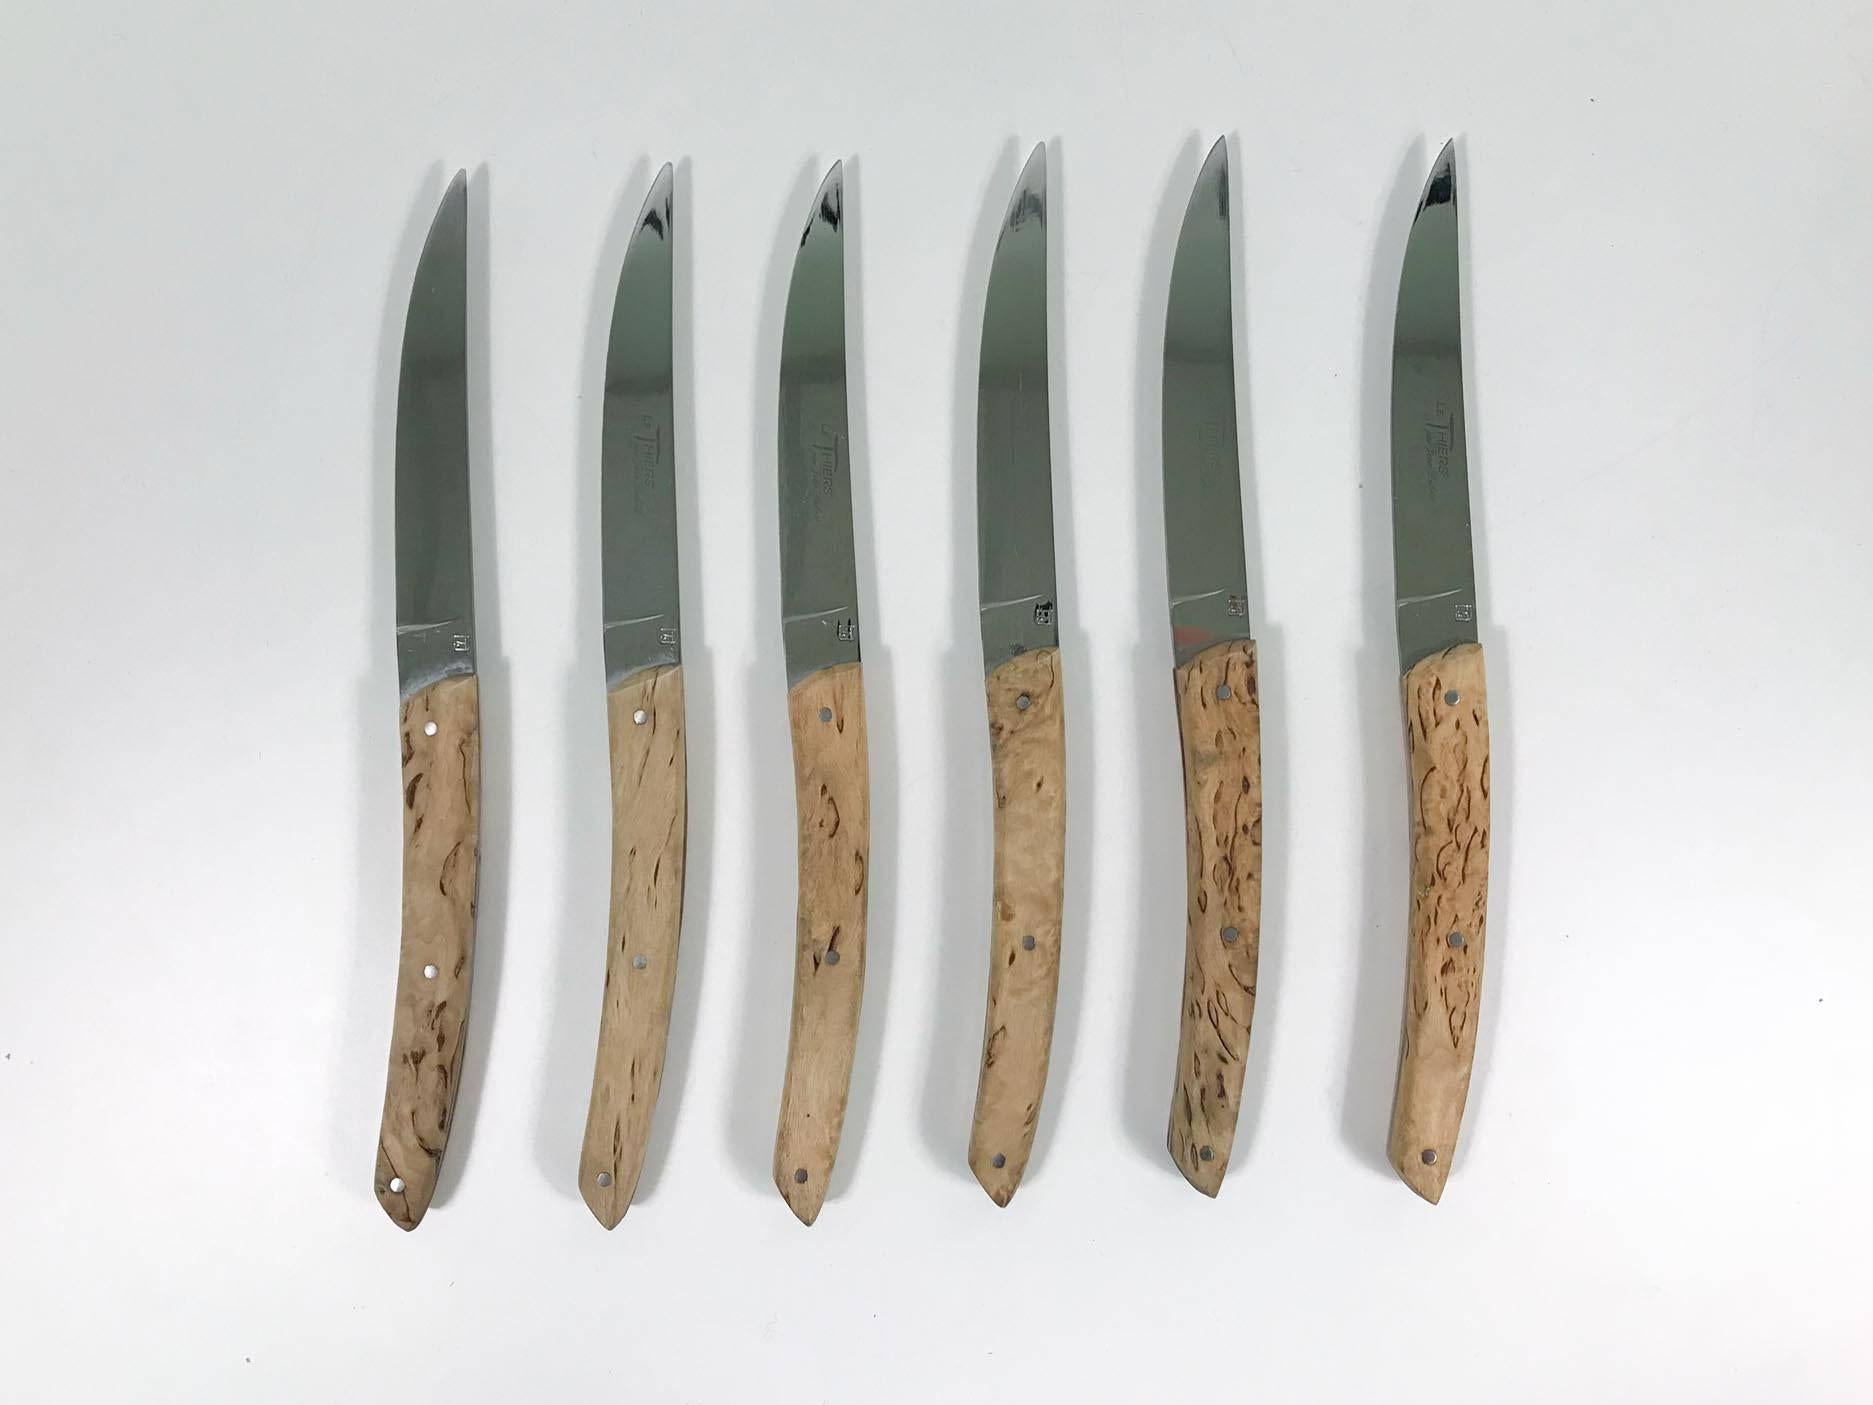 Set of six steak knives by Jean Beauvoir and marked Le Thiers. Good overall condition with wear consistent with regular use.